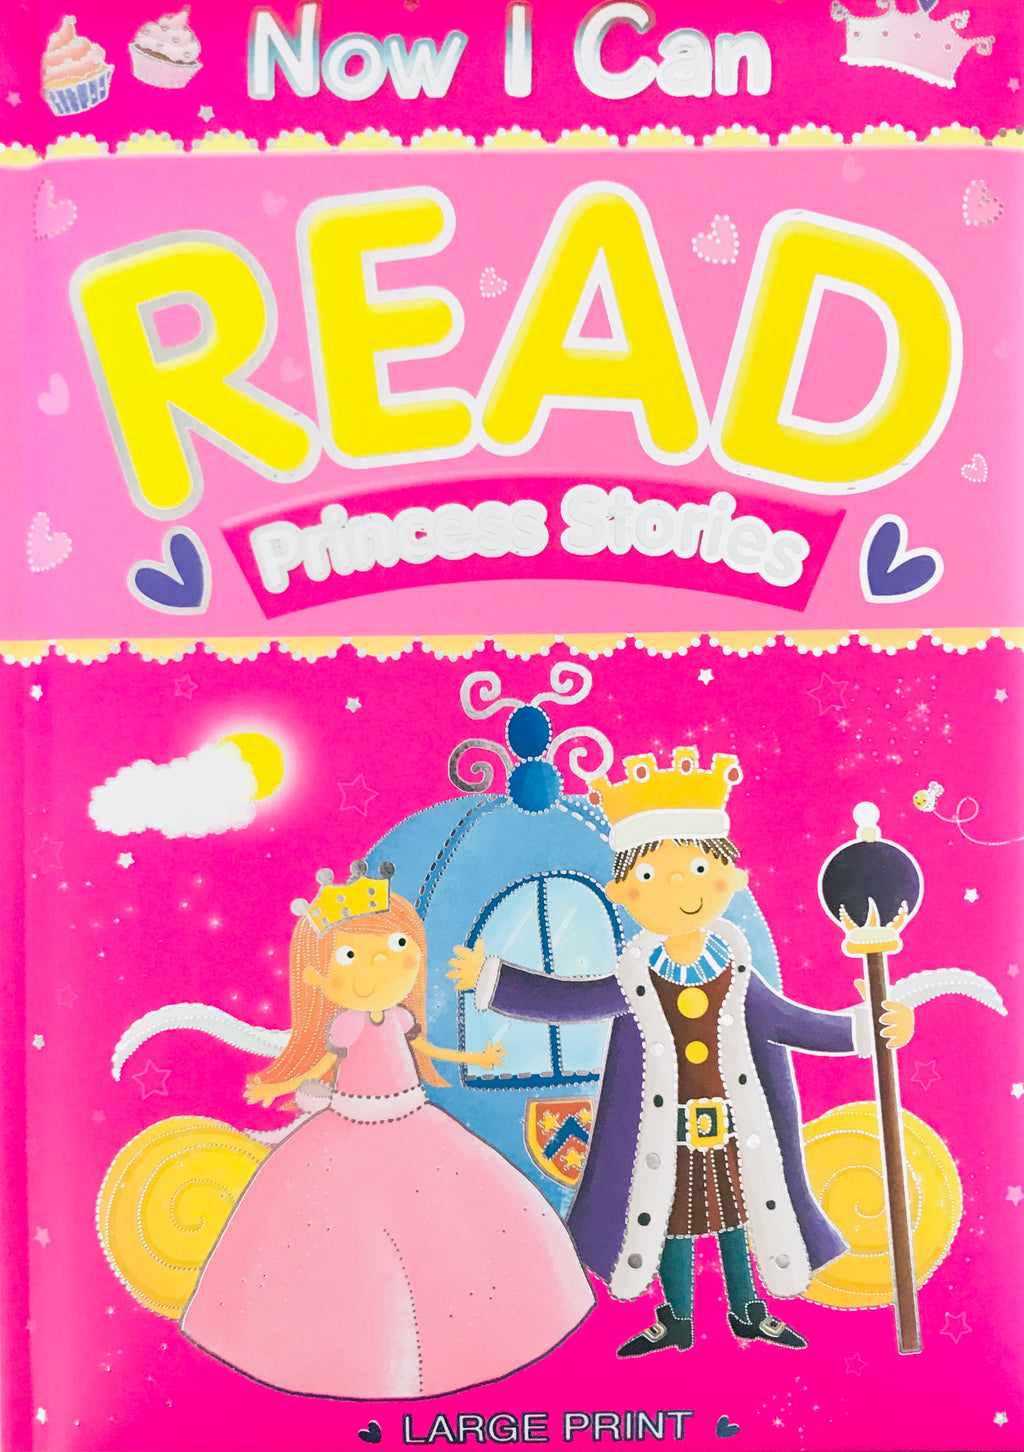 Now I can Read: Princess Stories